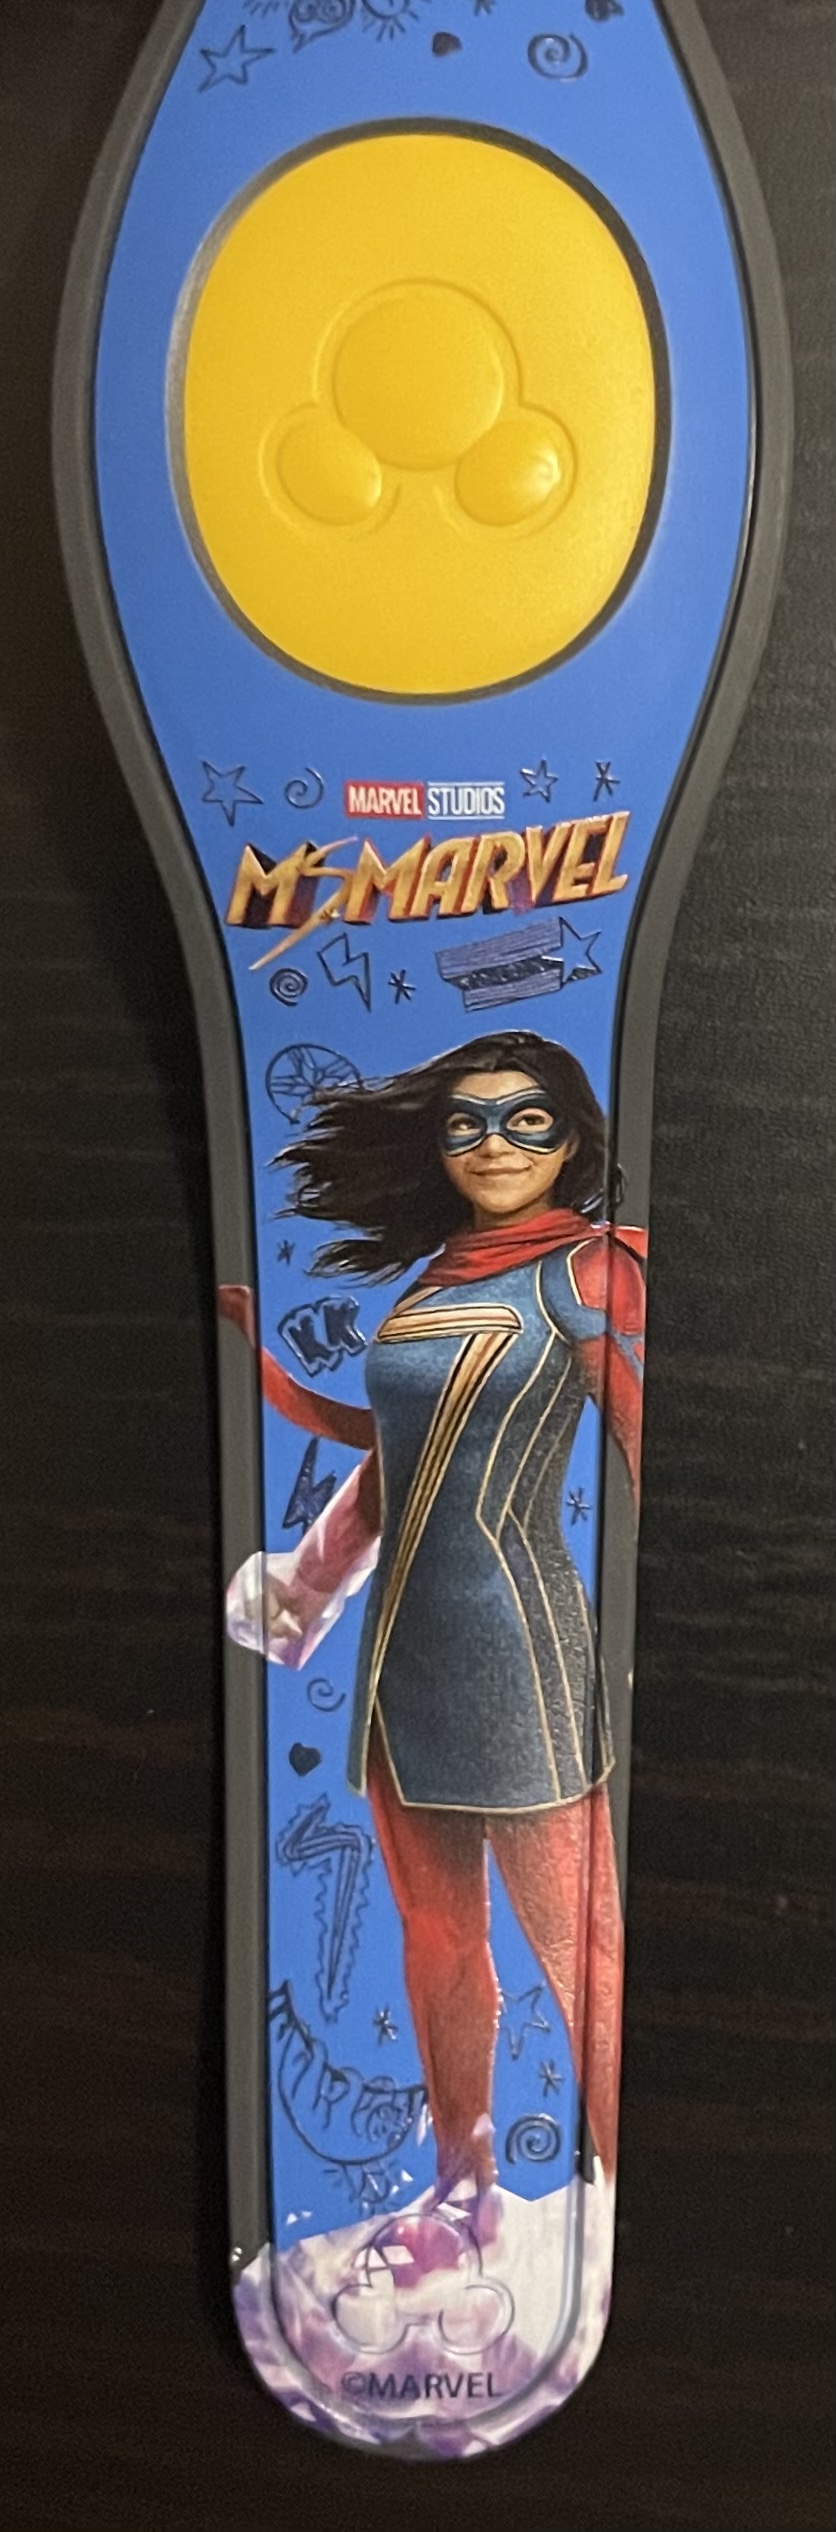 Ms. Marvel Limited Release MagicBand has been released today